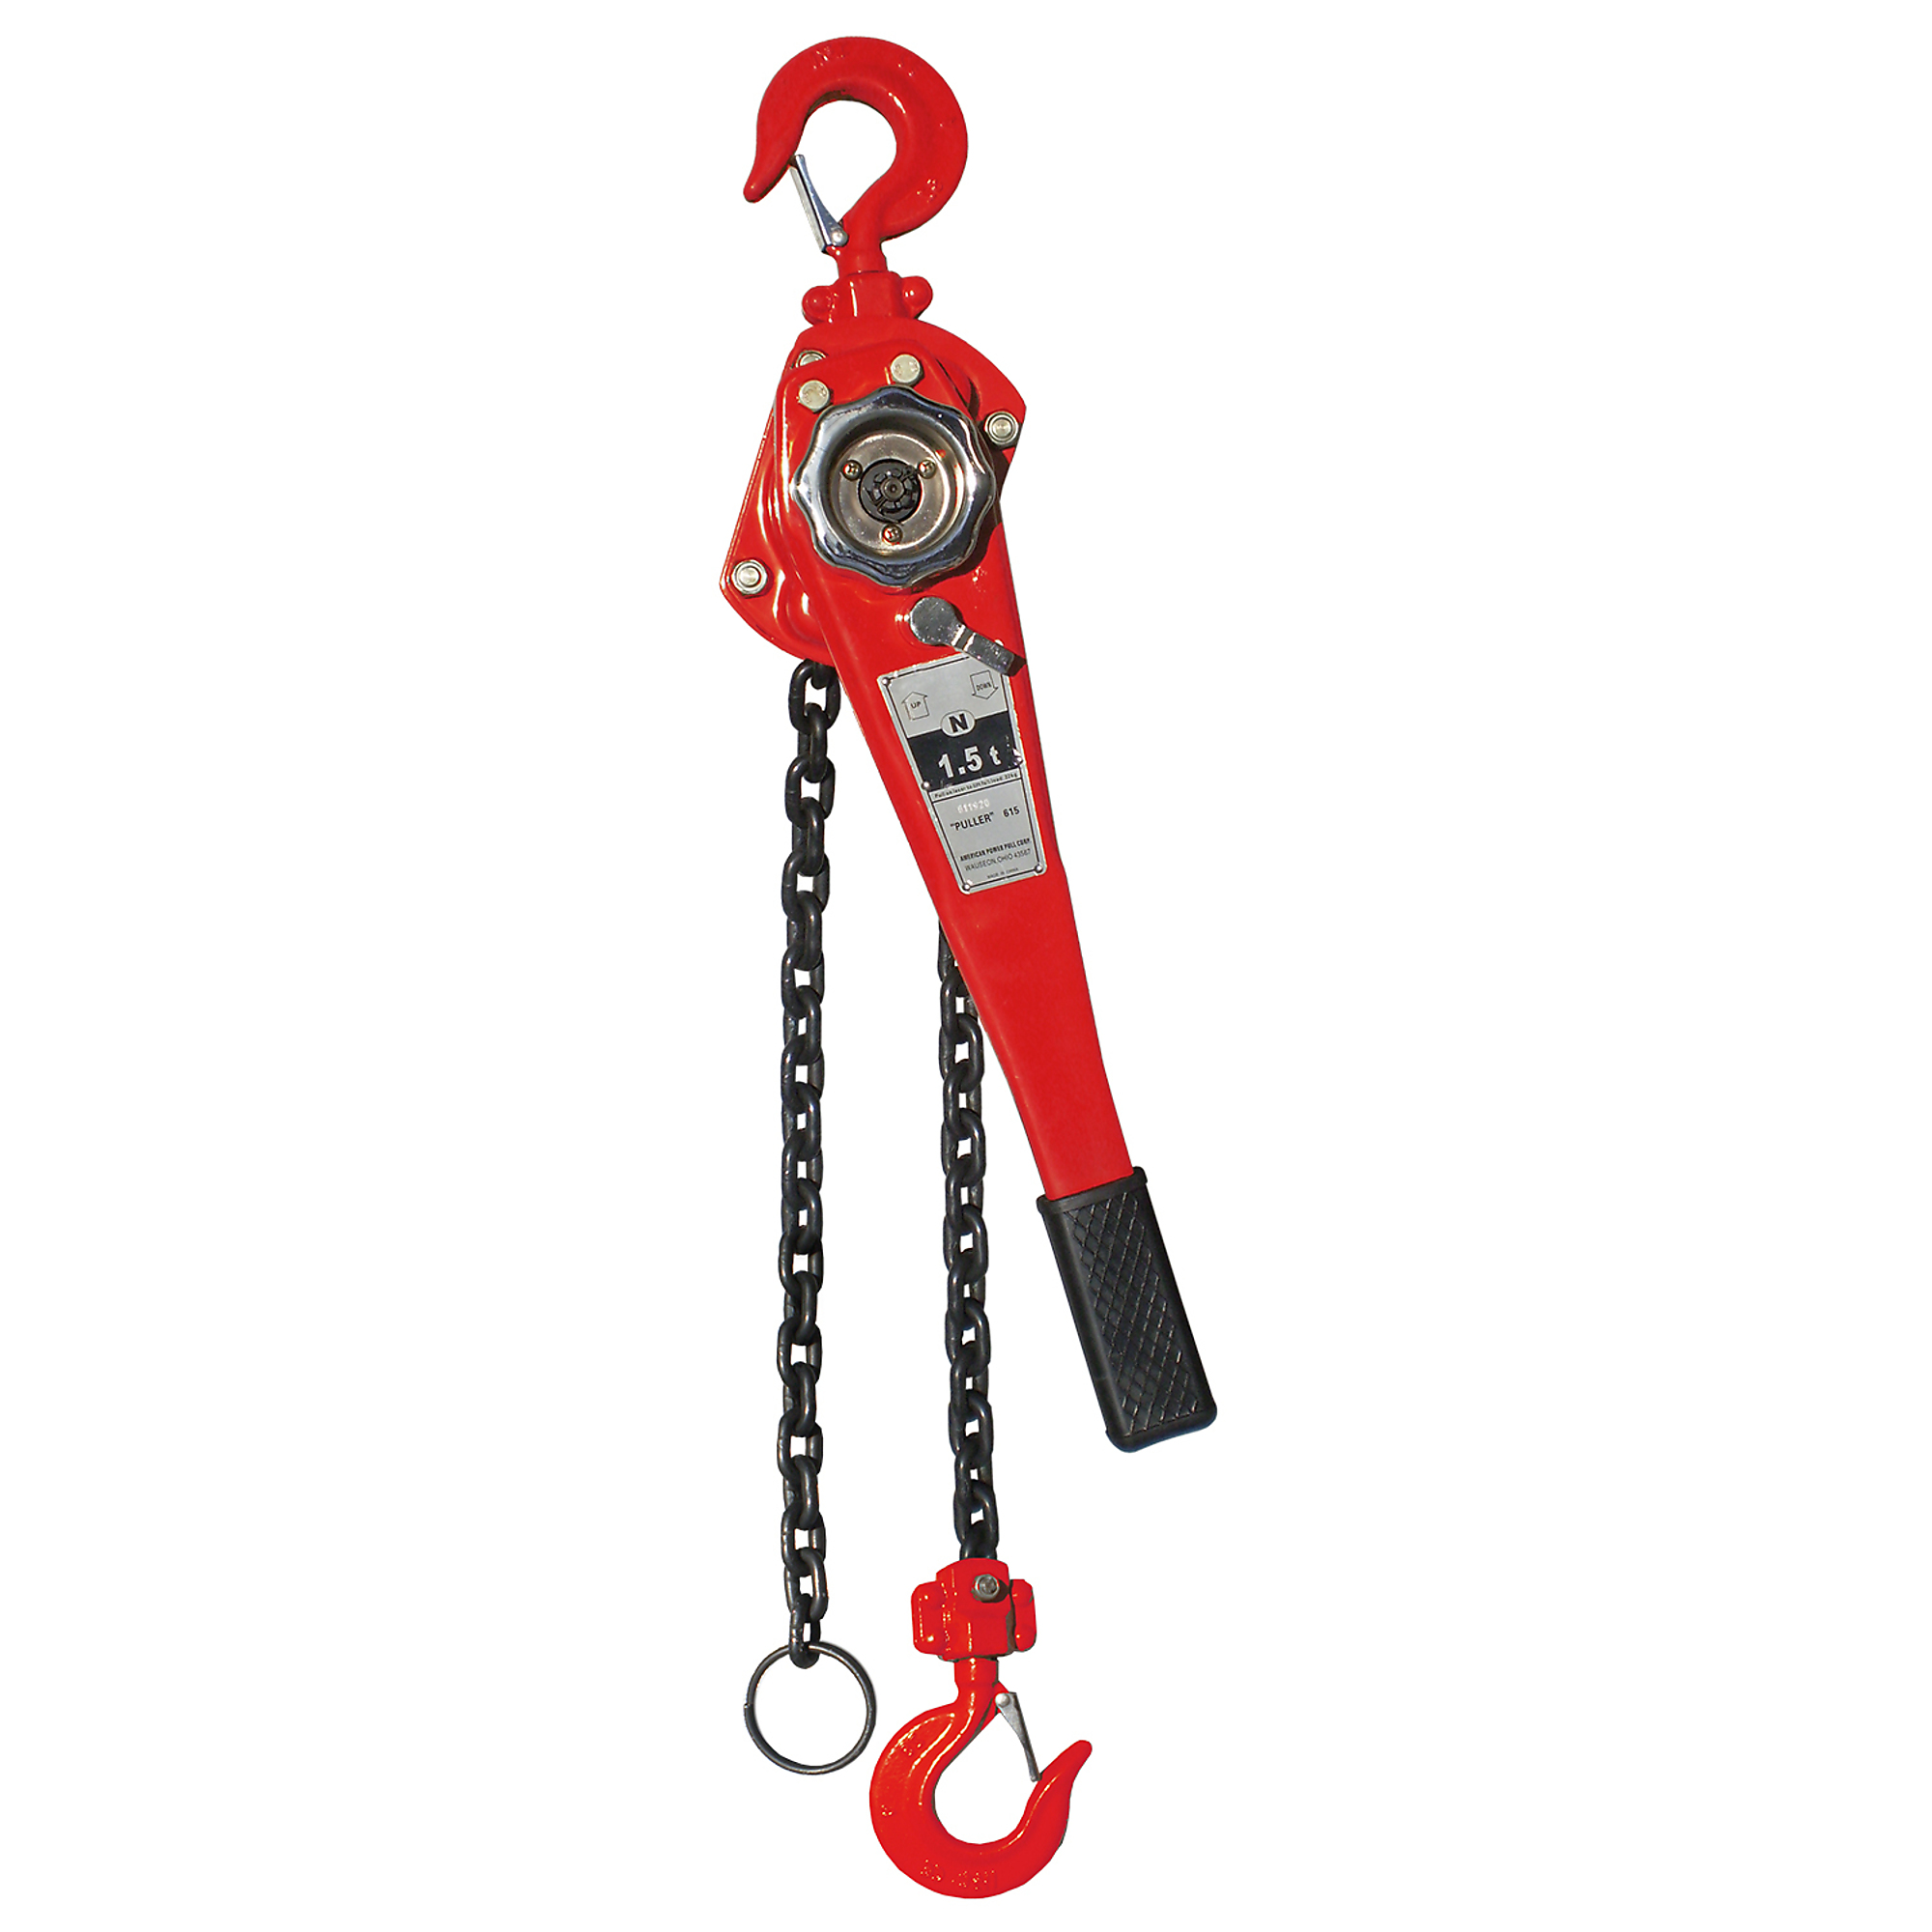 American Power Pull, 1.5 ton chain puller w/ 15ft. lift, Power Source Manual Lever, Capacity 3000 lb, Lift Height 15 ft, Model 615-15